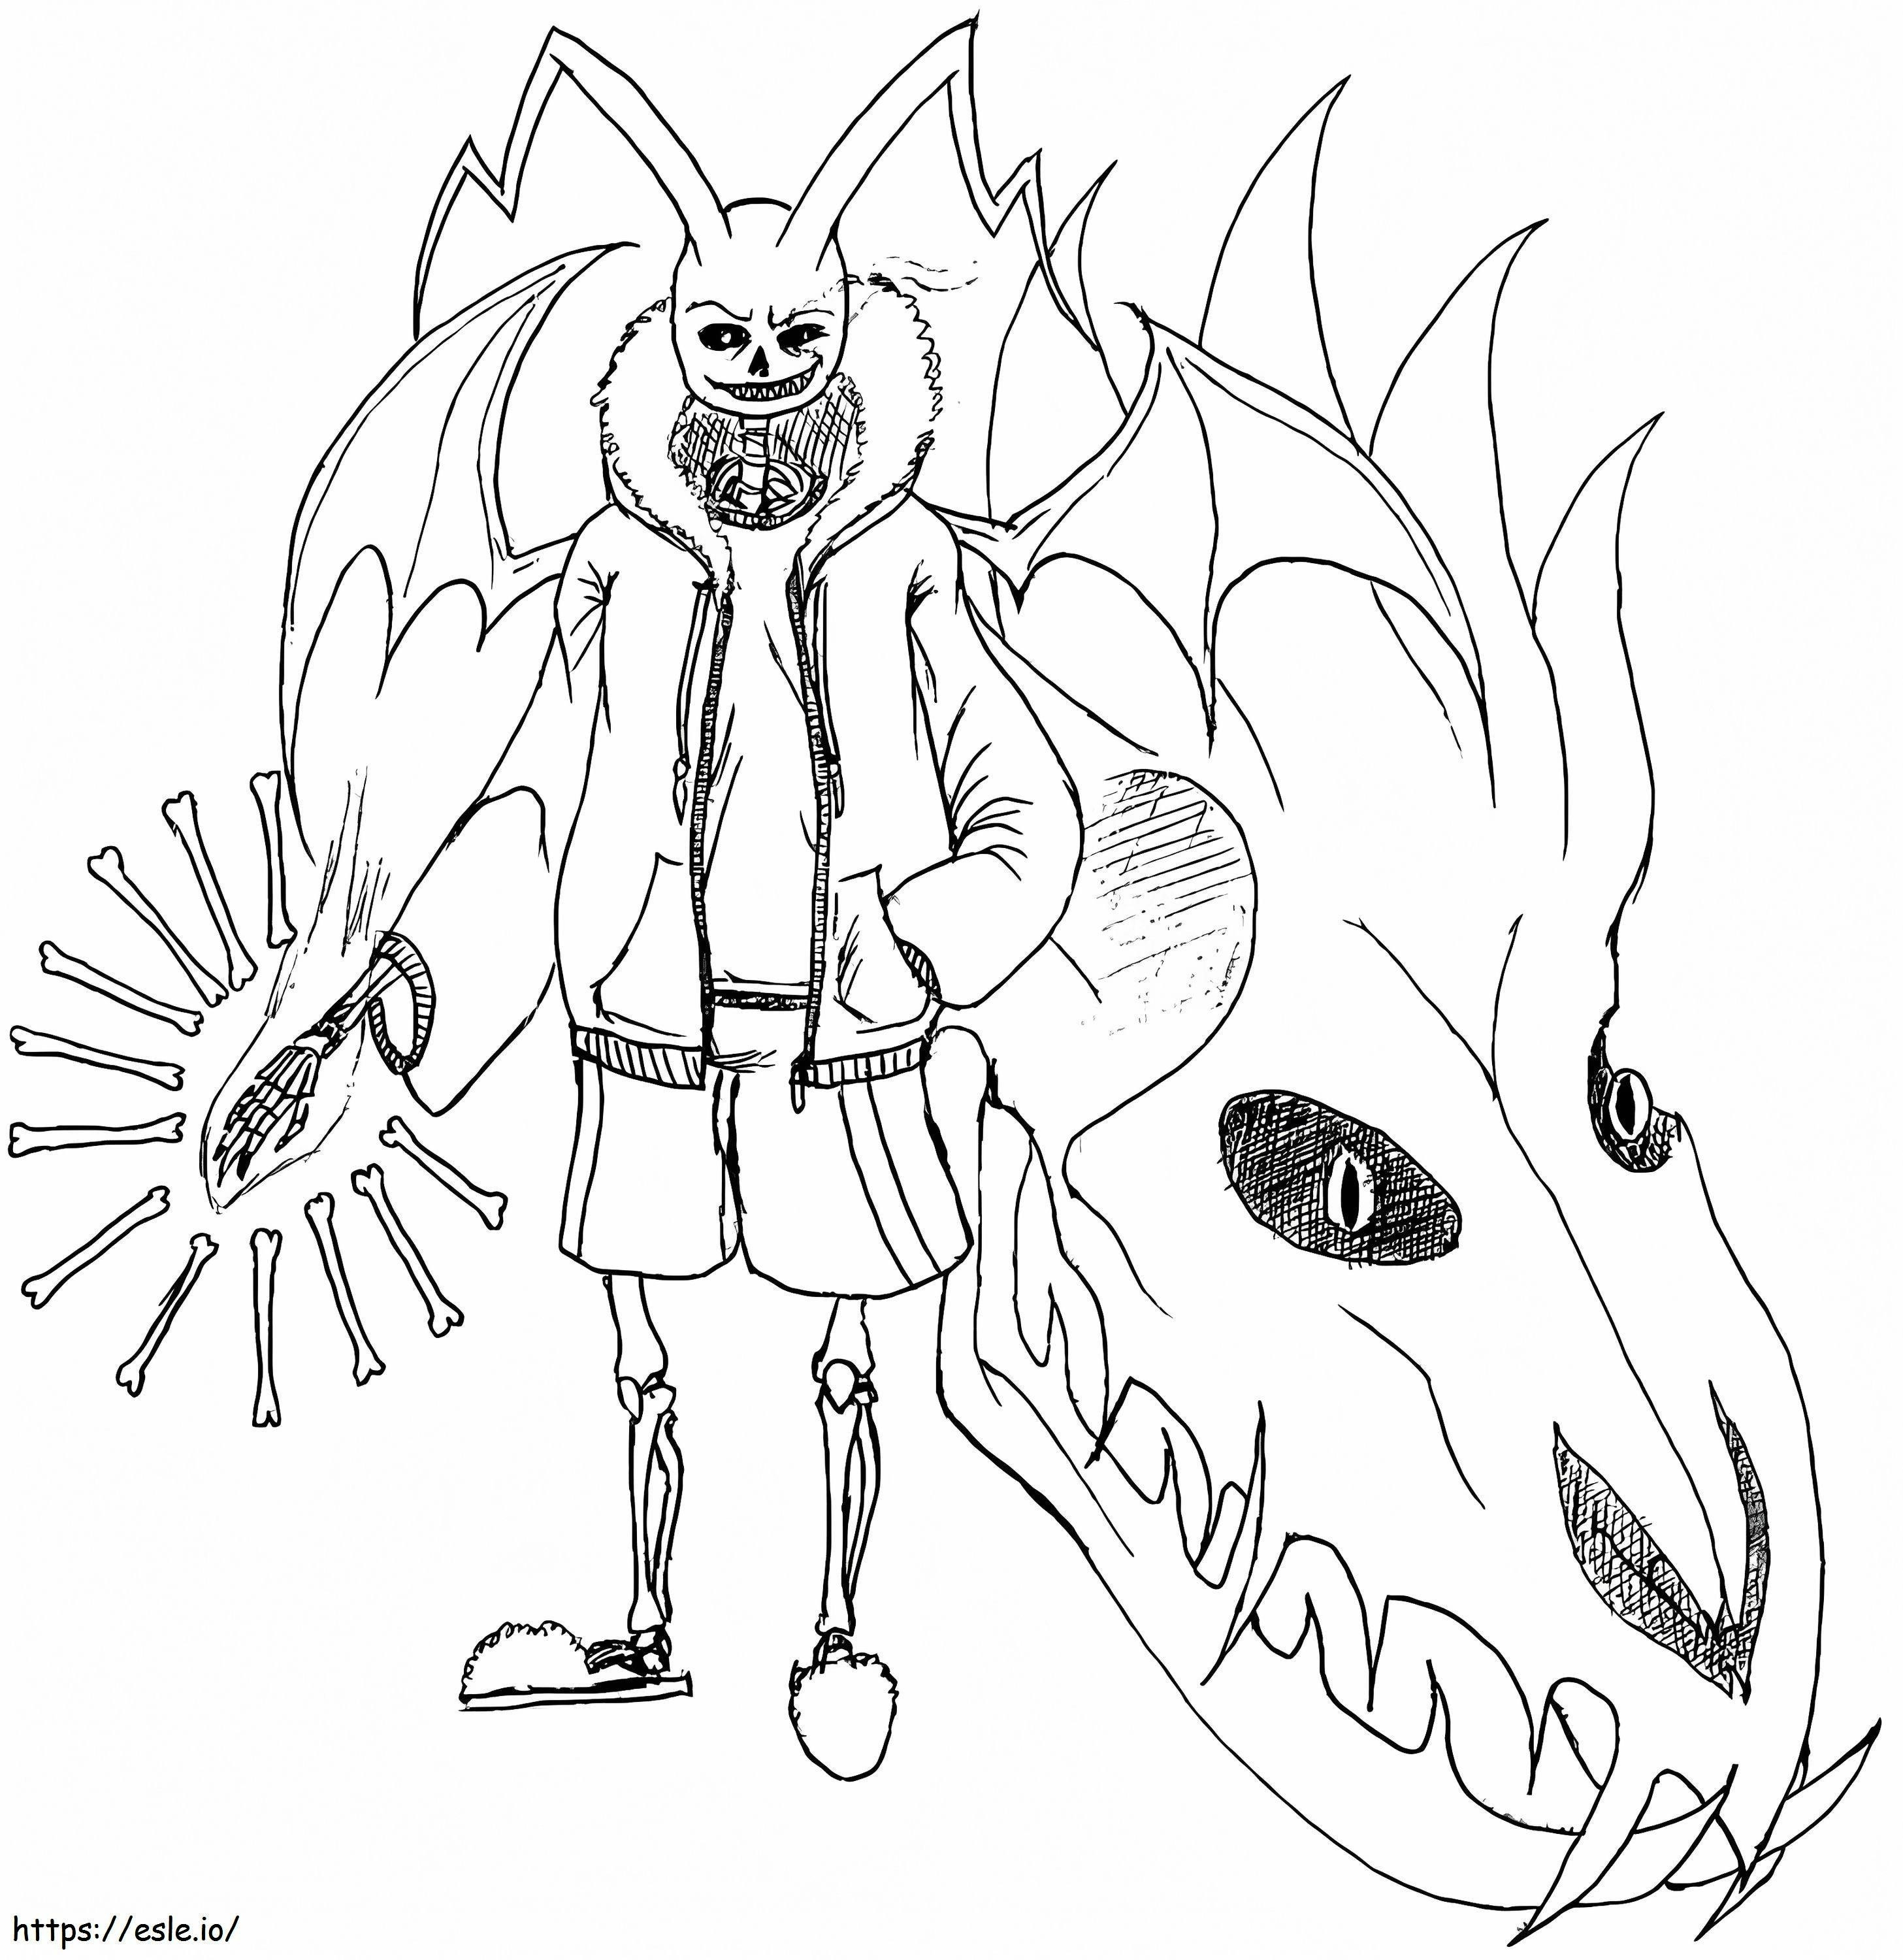 Sans And Dragon coloring page